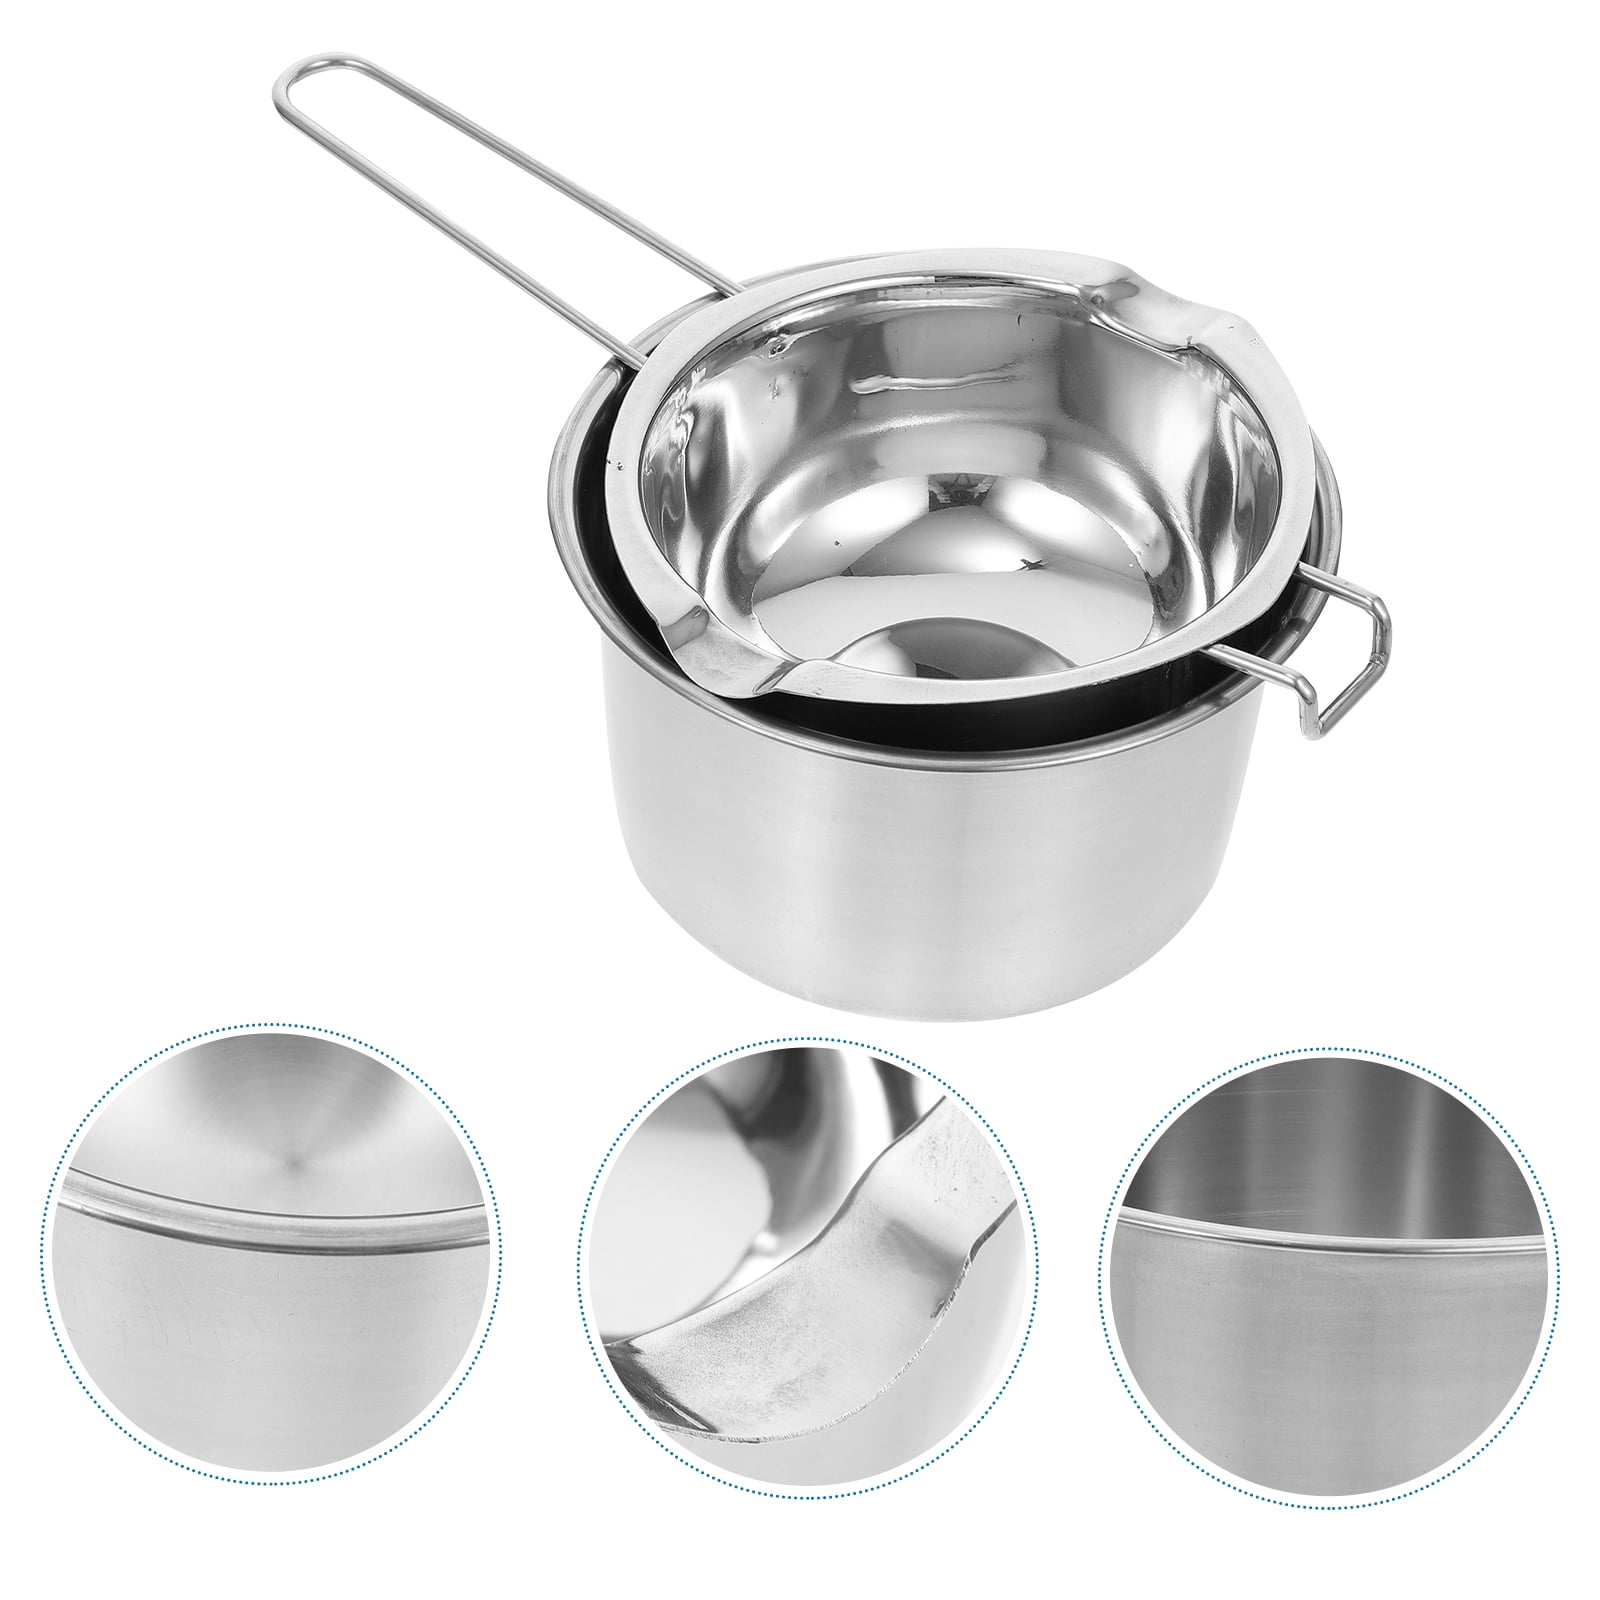 Yitokmc 2 Pack Stainless Steel Double Boiler Pot Chocolate Melting Pot Soap  Candle Candy Making Tool